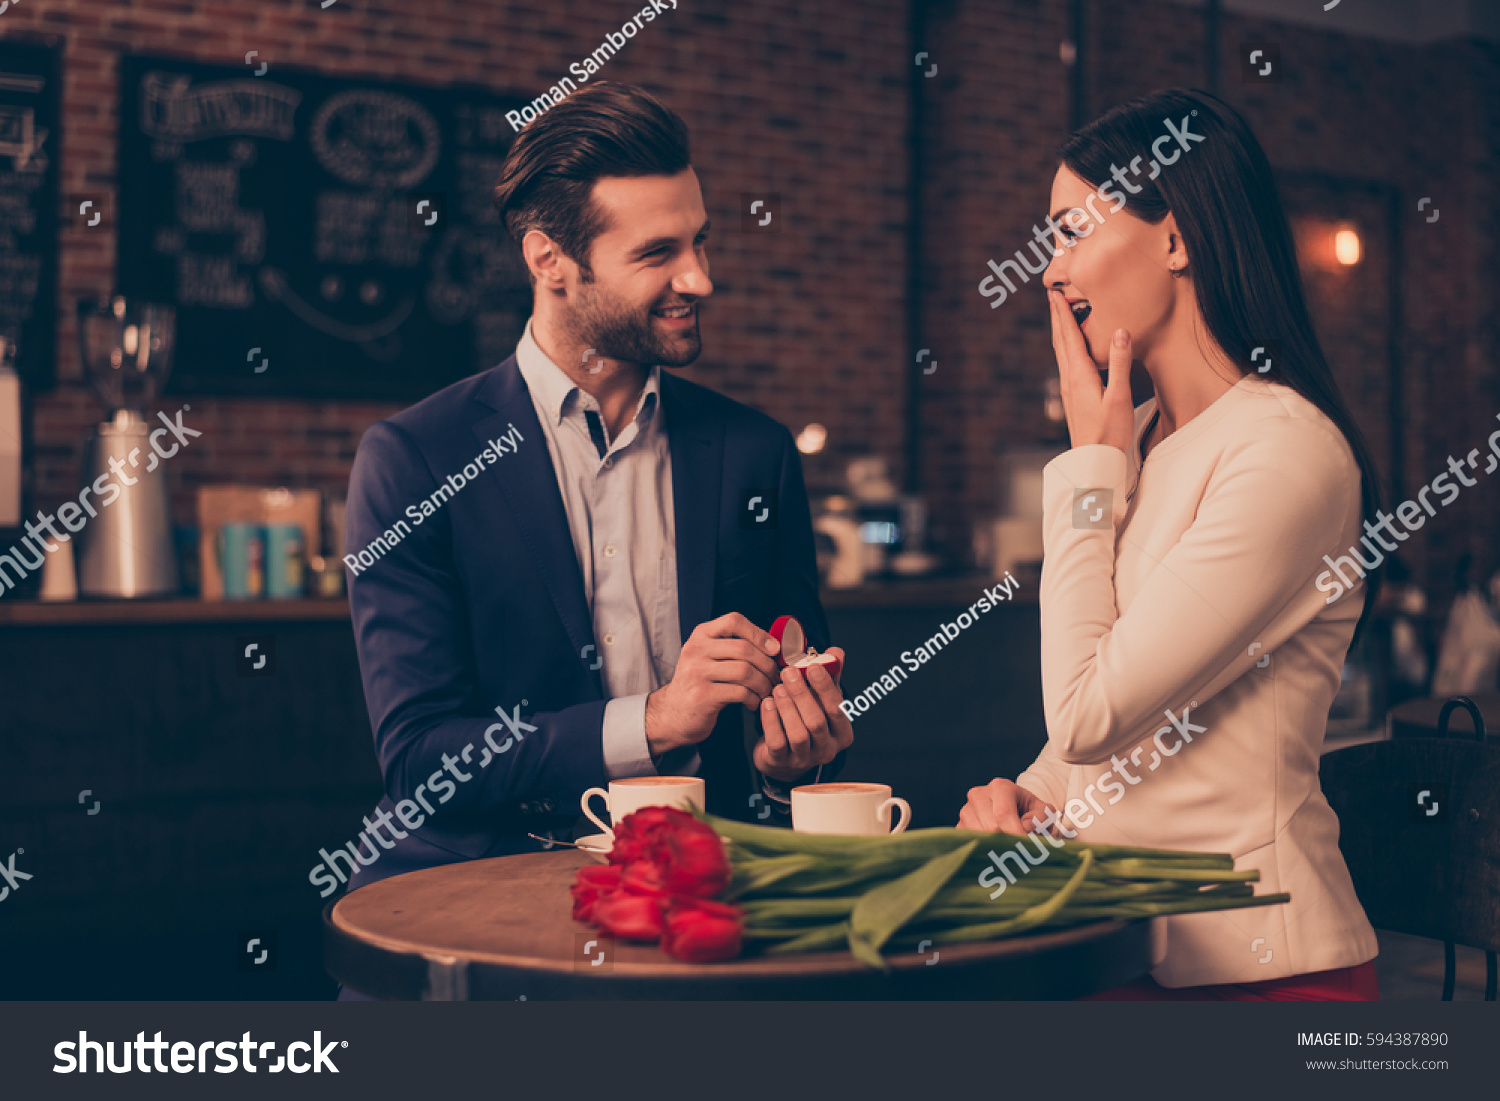 A happy man making proposal in a cafe #594387890